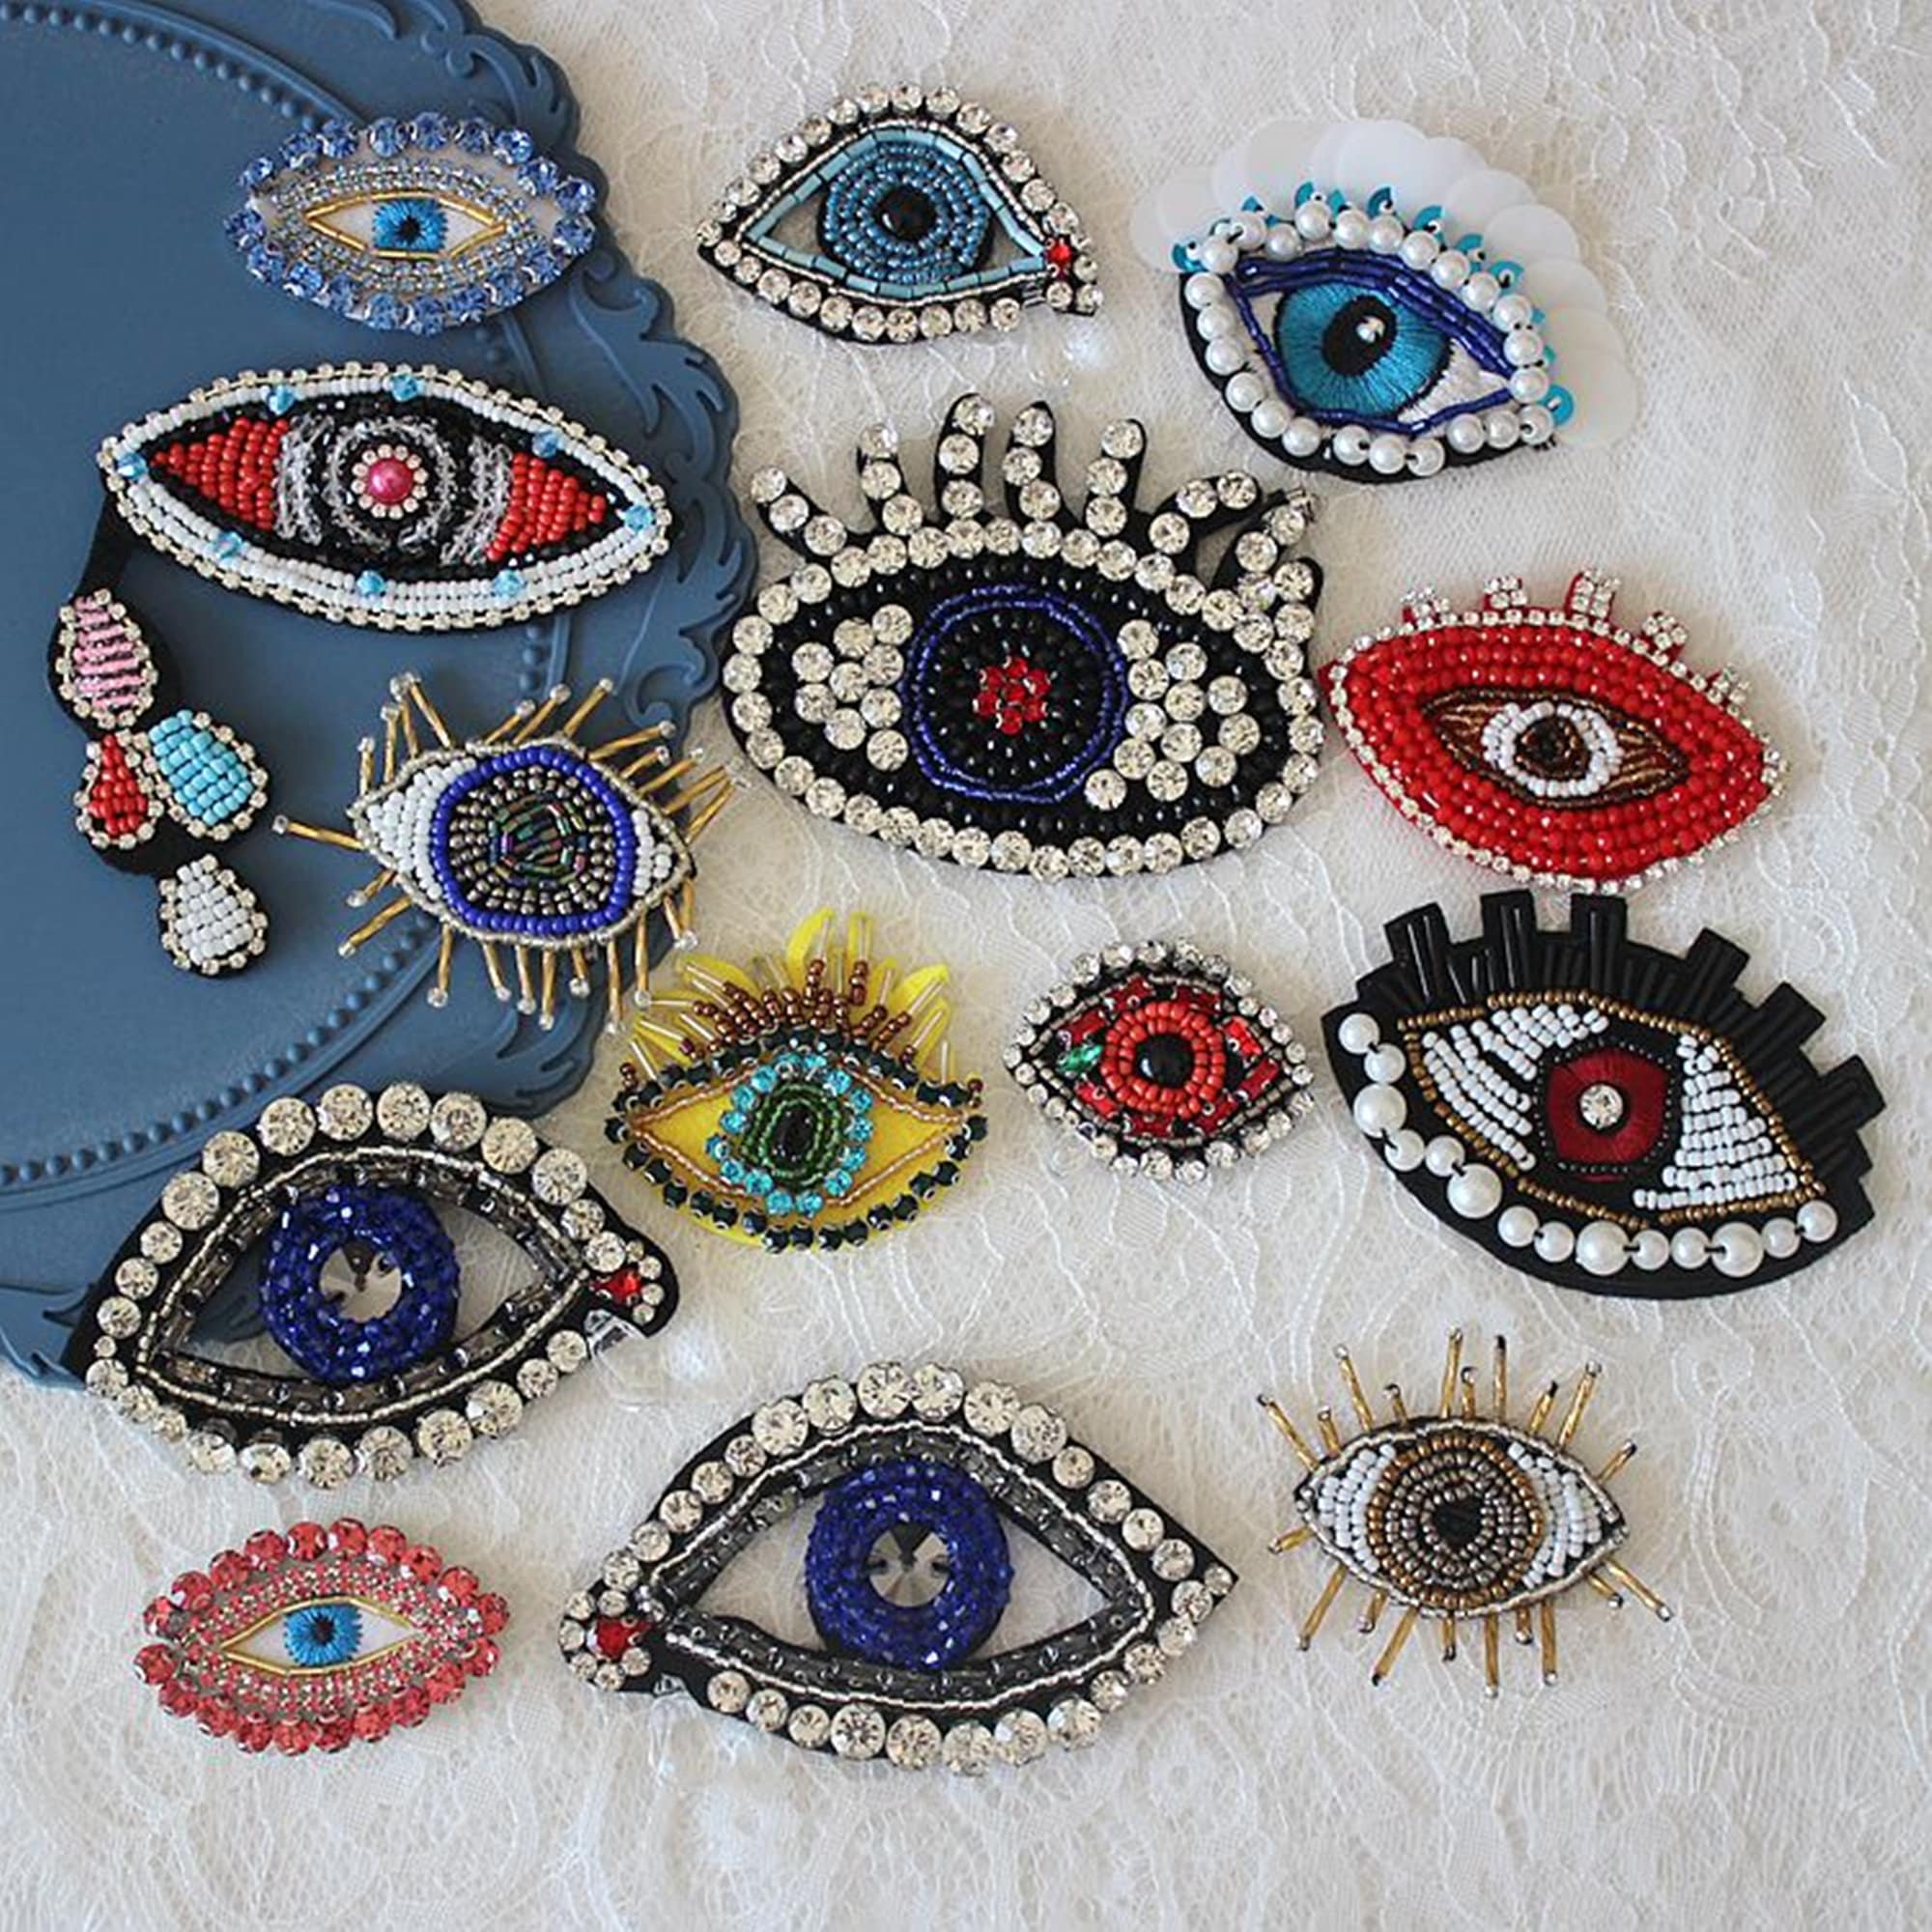 2 x Sequin Evil Eye Patches Large Blue Gold IRON-ON SEW-ON Applique  Clothing Dec